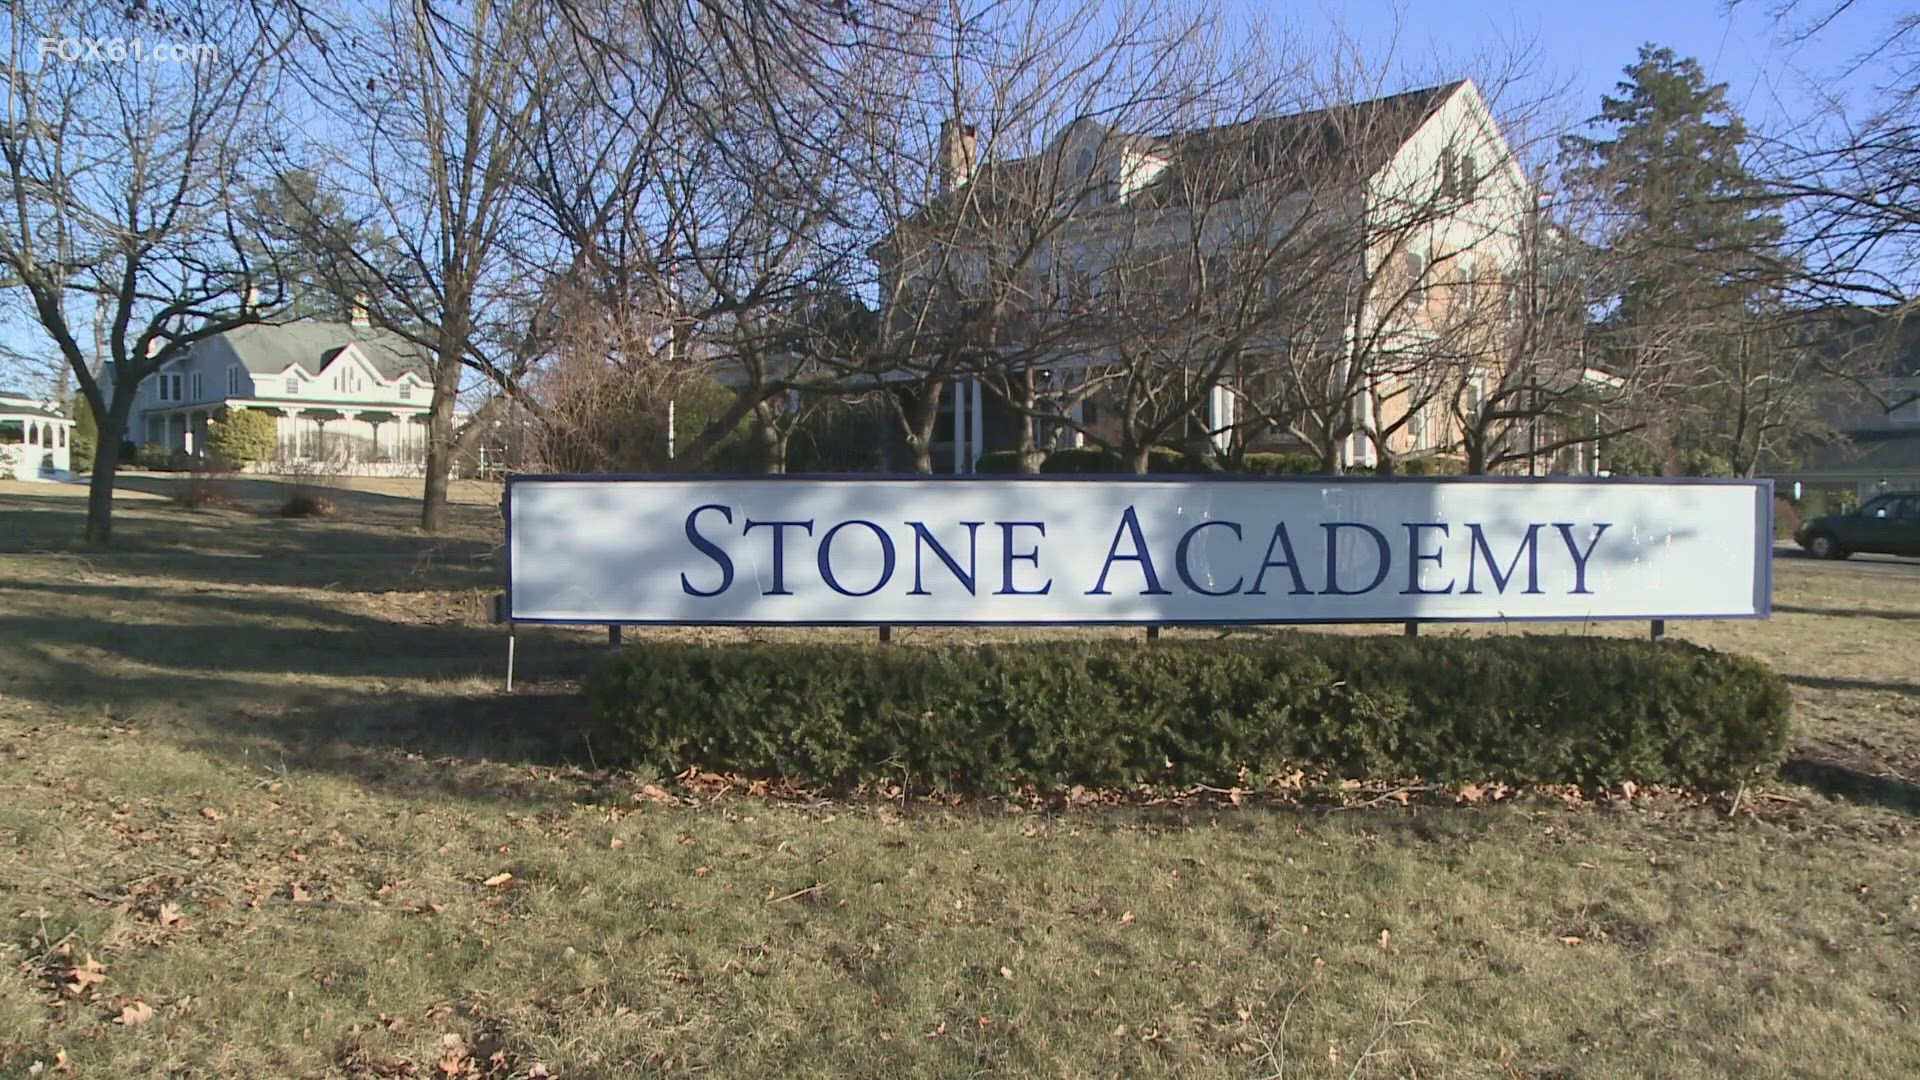 The demands to Stone Academy also sought information on how and when they decided to shutter their doors and how the decision was relayed back to the students.